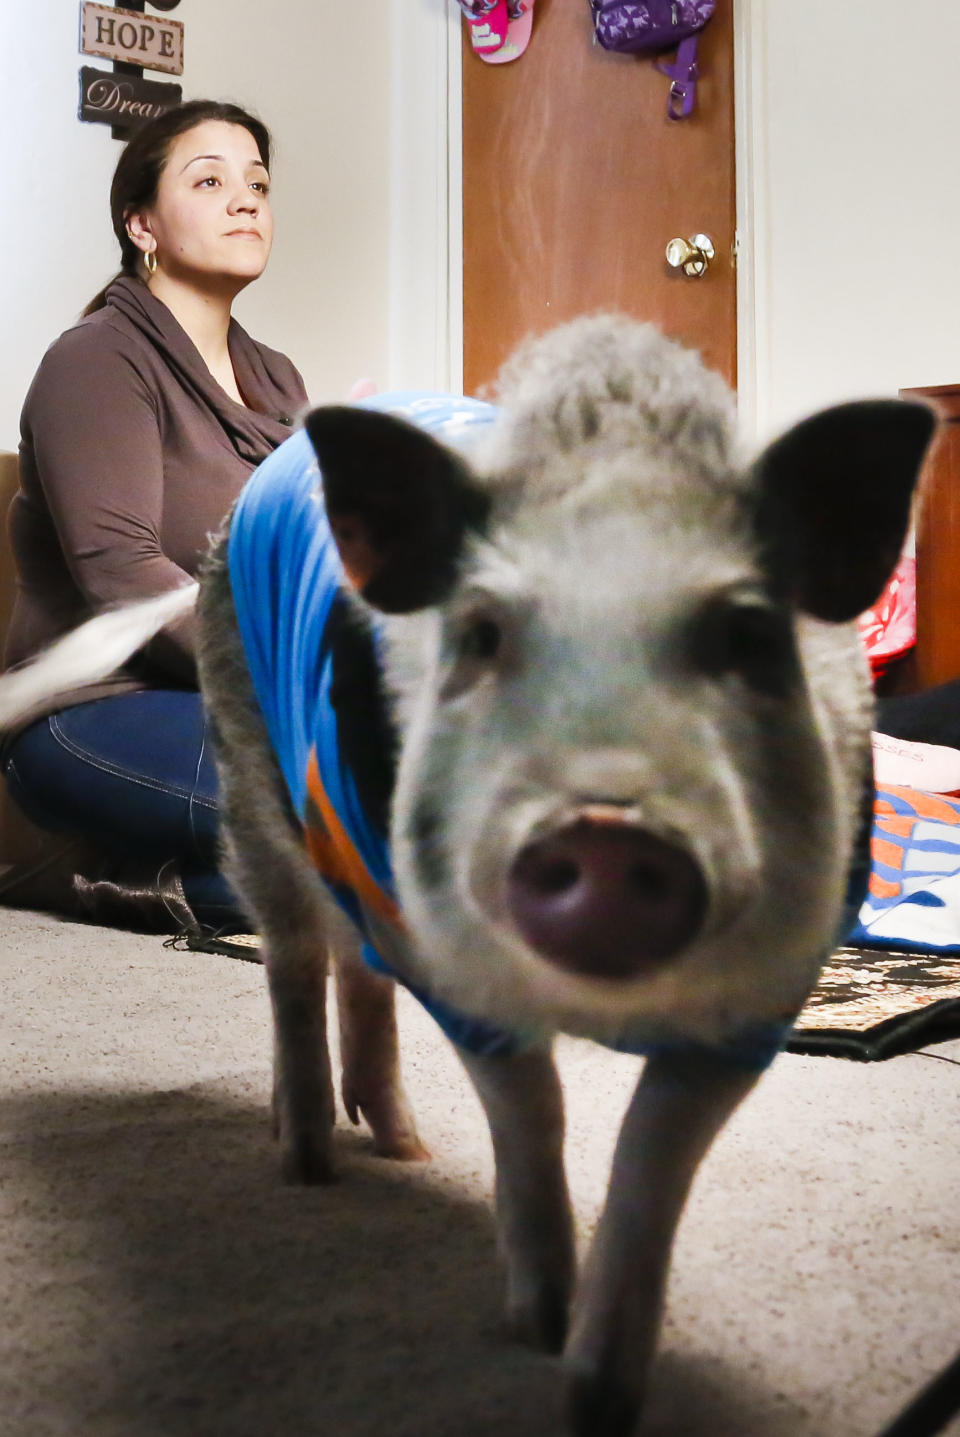 Danielle Forgione and Petey, the family's pet pig, during an interview, on Thursday, March 21, 2013, in the Queens borough of New York. Forgione is scrambling to sell her second-floor apartment after a neighbor complained about 1-year-old Petey the pig to the co-op board. In November and December she was issued city animal violations and in January was told by both the city and her management office that she needed to get rid of the pig. (AP Photo/Bebeto Matthews)